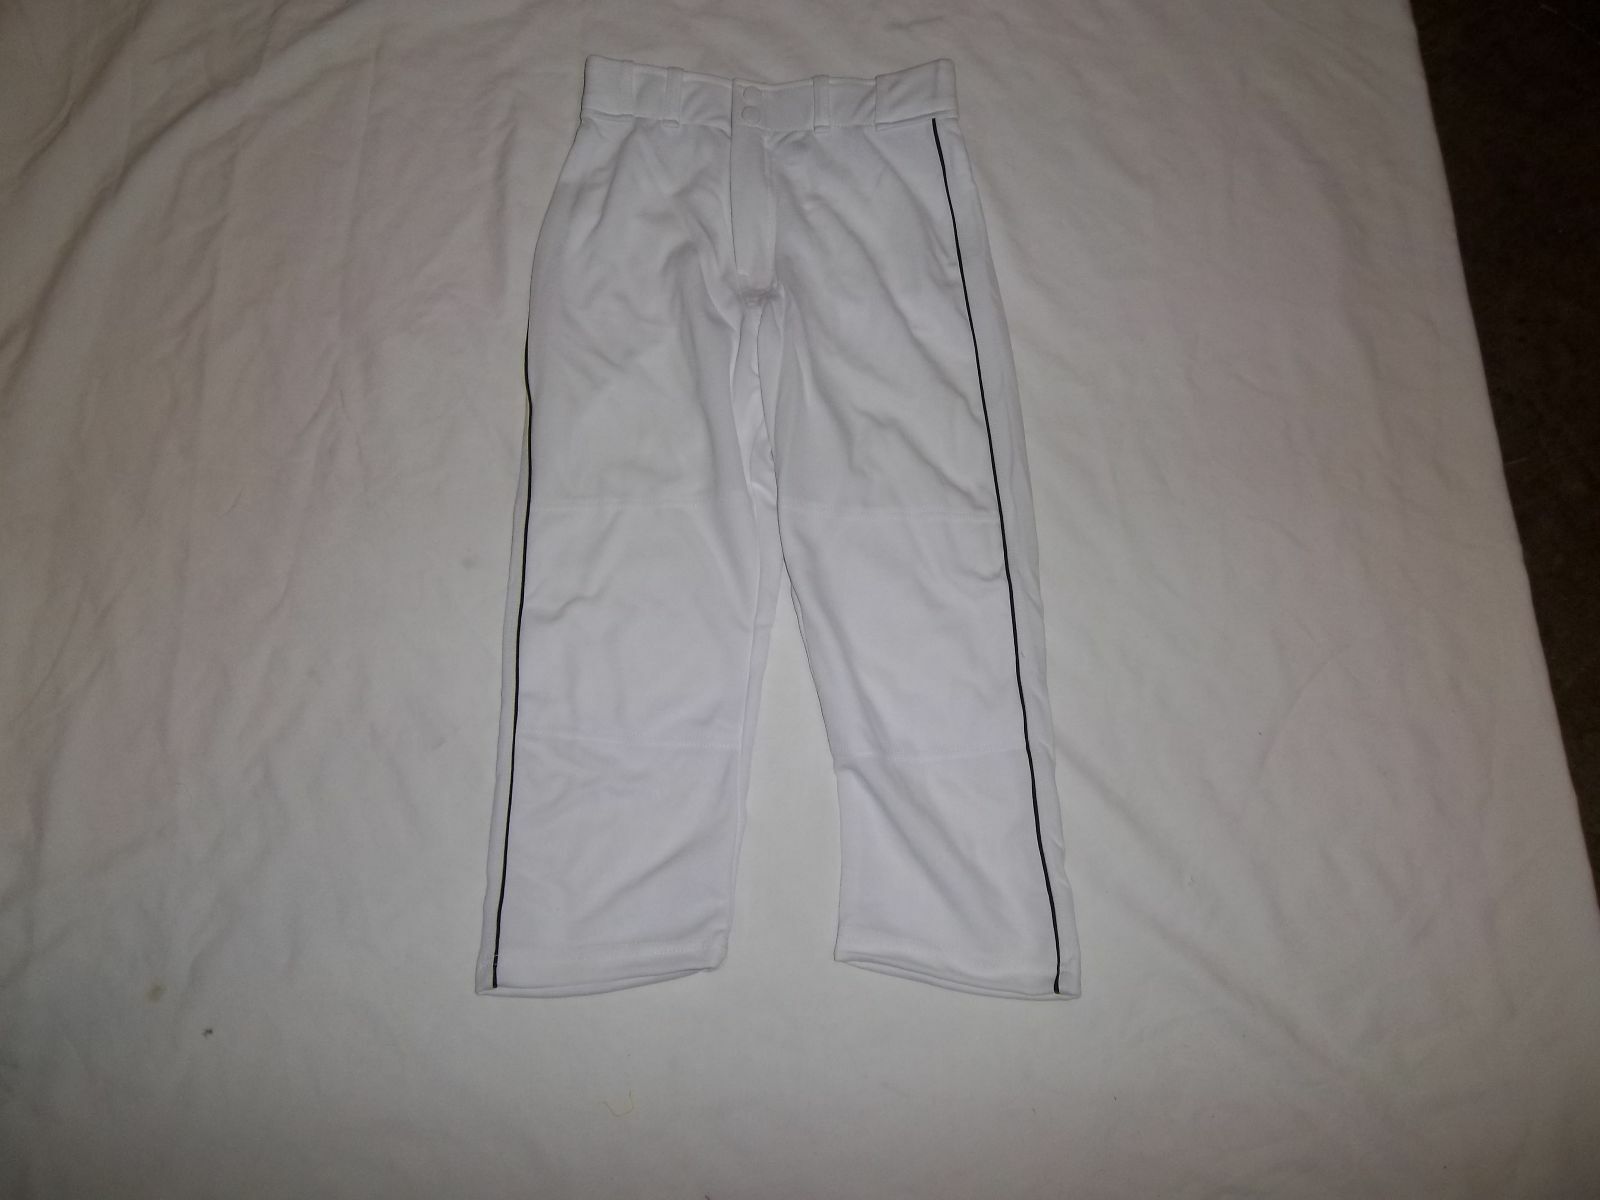 FRANKLIN RELAXED FIT YOUTH BASEBALL PANTS (OPEN BOTTOM WHITE WITH BLACK PIPING)